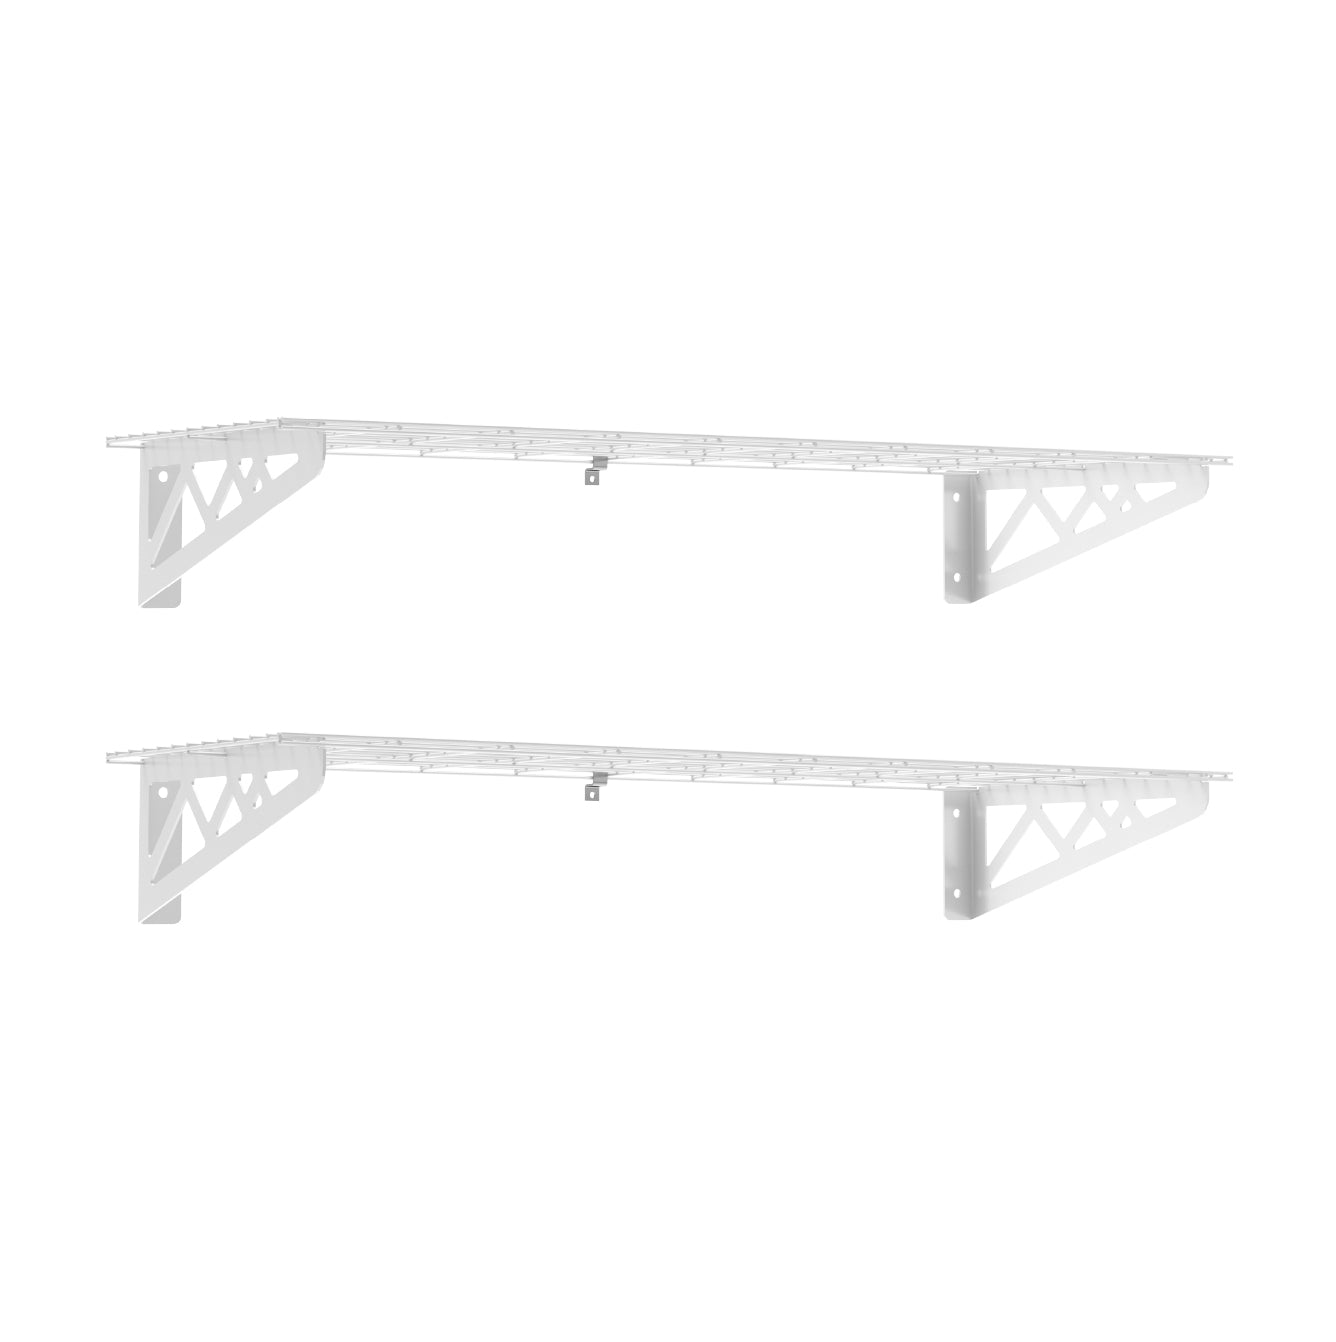 12’ x 36’ Wall Shelves (Two Pack with Hooks) - Mounted